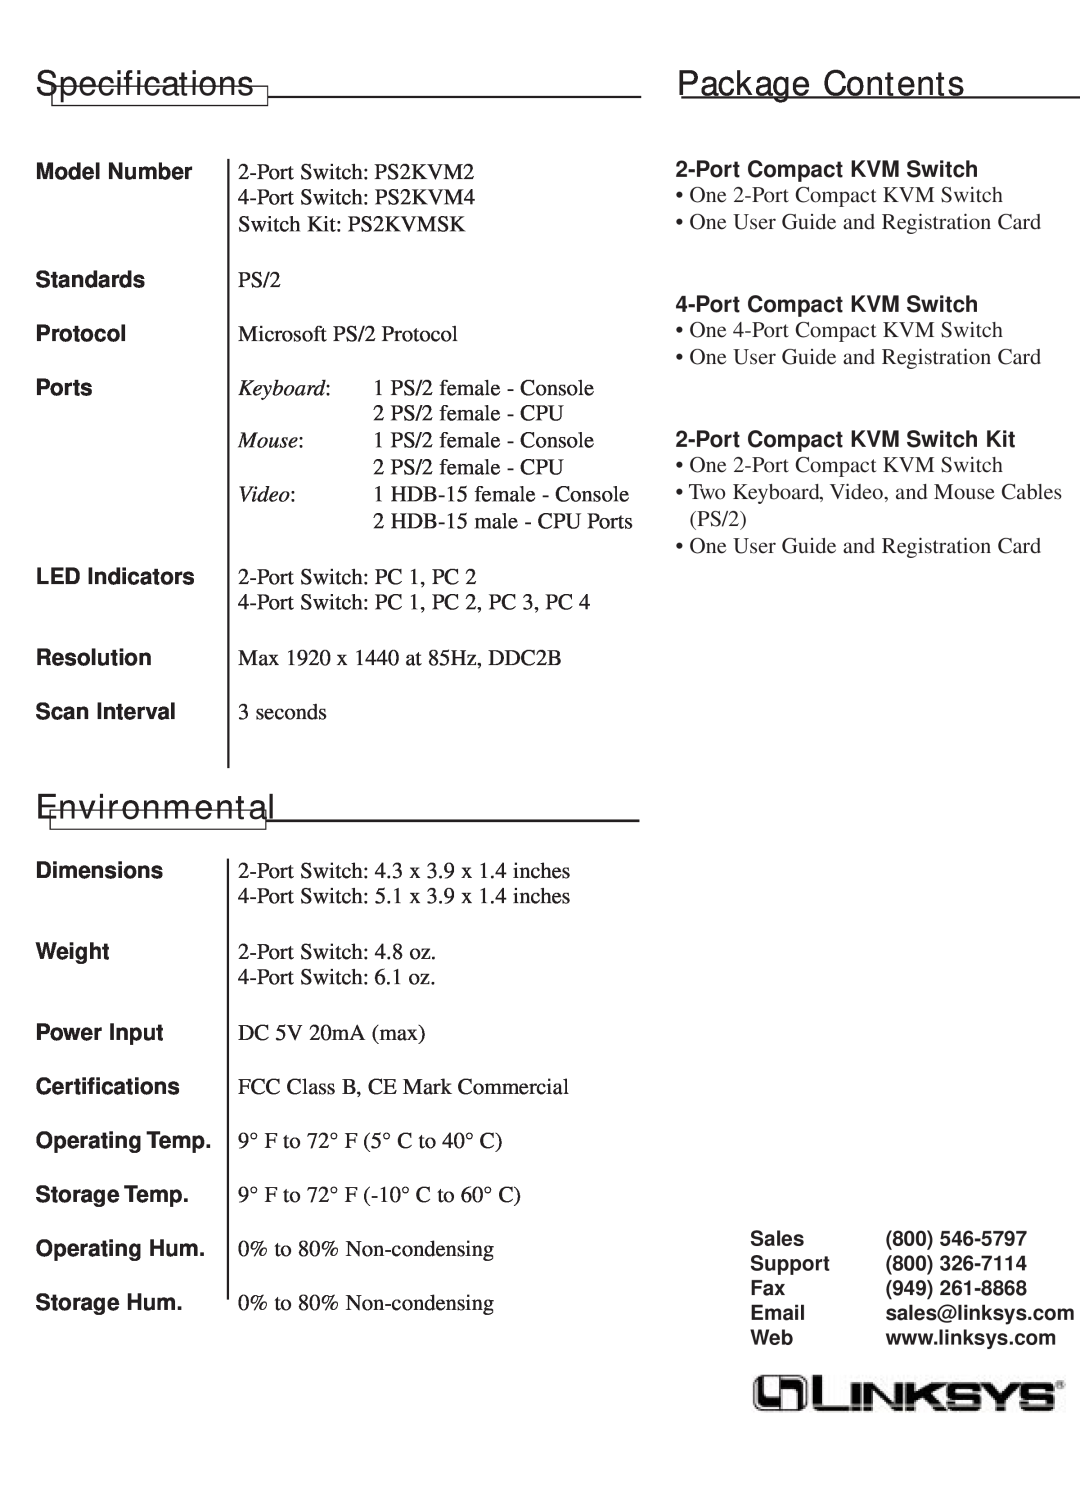 Linksys PS2KVM2 warranty Specifications, Package Contents, Environmental, Keyboard, Mouse, Video 